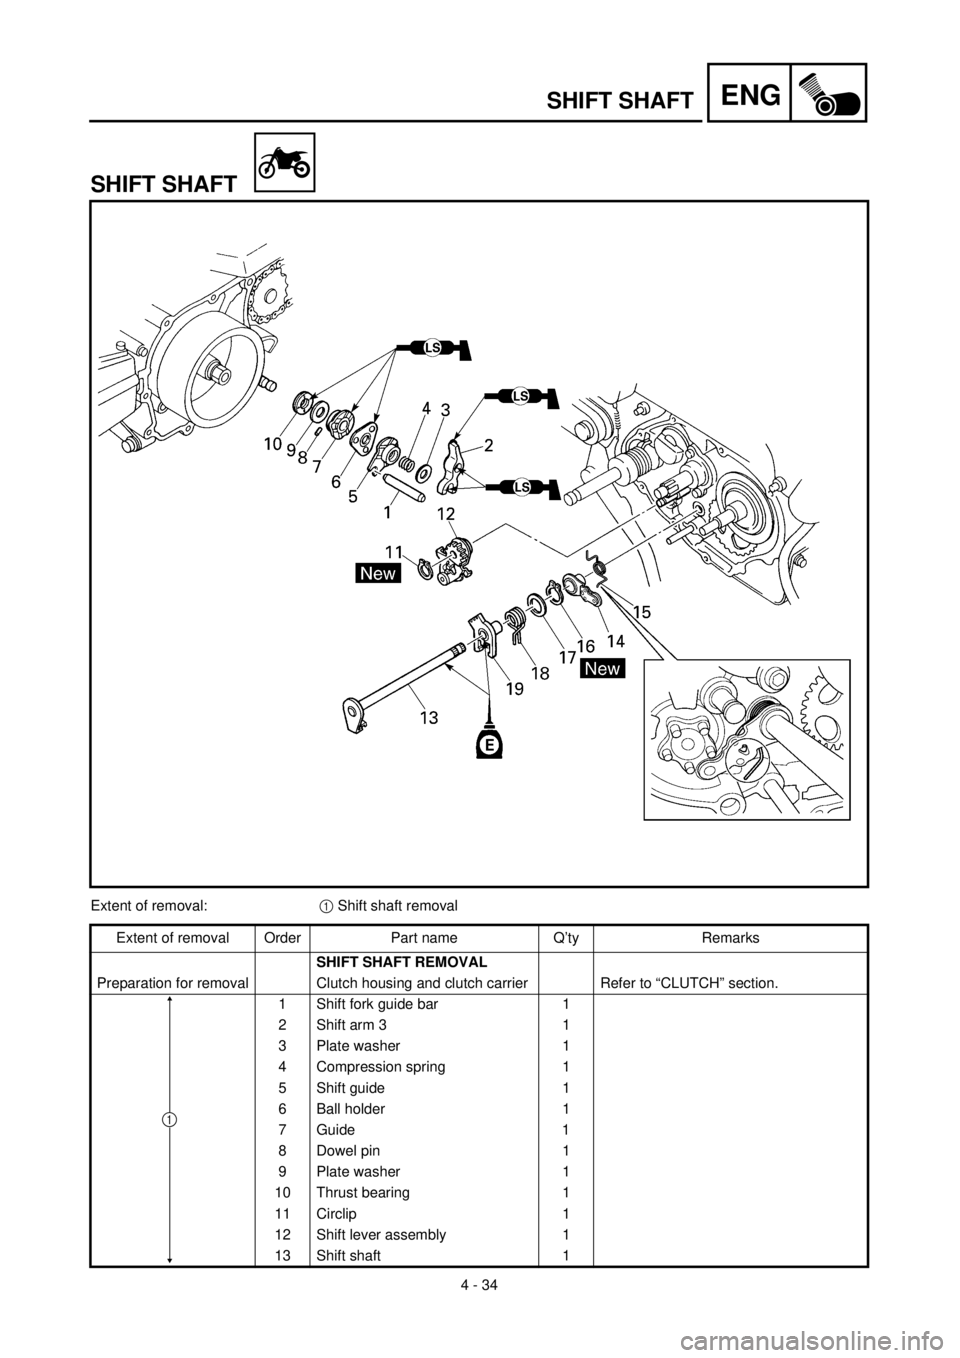 YAMAHA TTR90 2002  Notices Demploi (in French) 4 - 34
ENGSHIFT SHAFT
SHIFT SHAFT
Extent of removal:1 Shift shaft removal
Extent of removal Order Part name Q’ty Remarks
SHIFT SHAFT REMOVAL 
Preparation for removal Clutch housing and clutch carrie